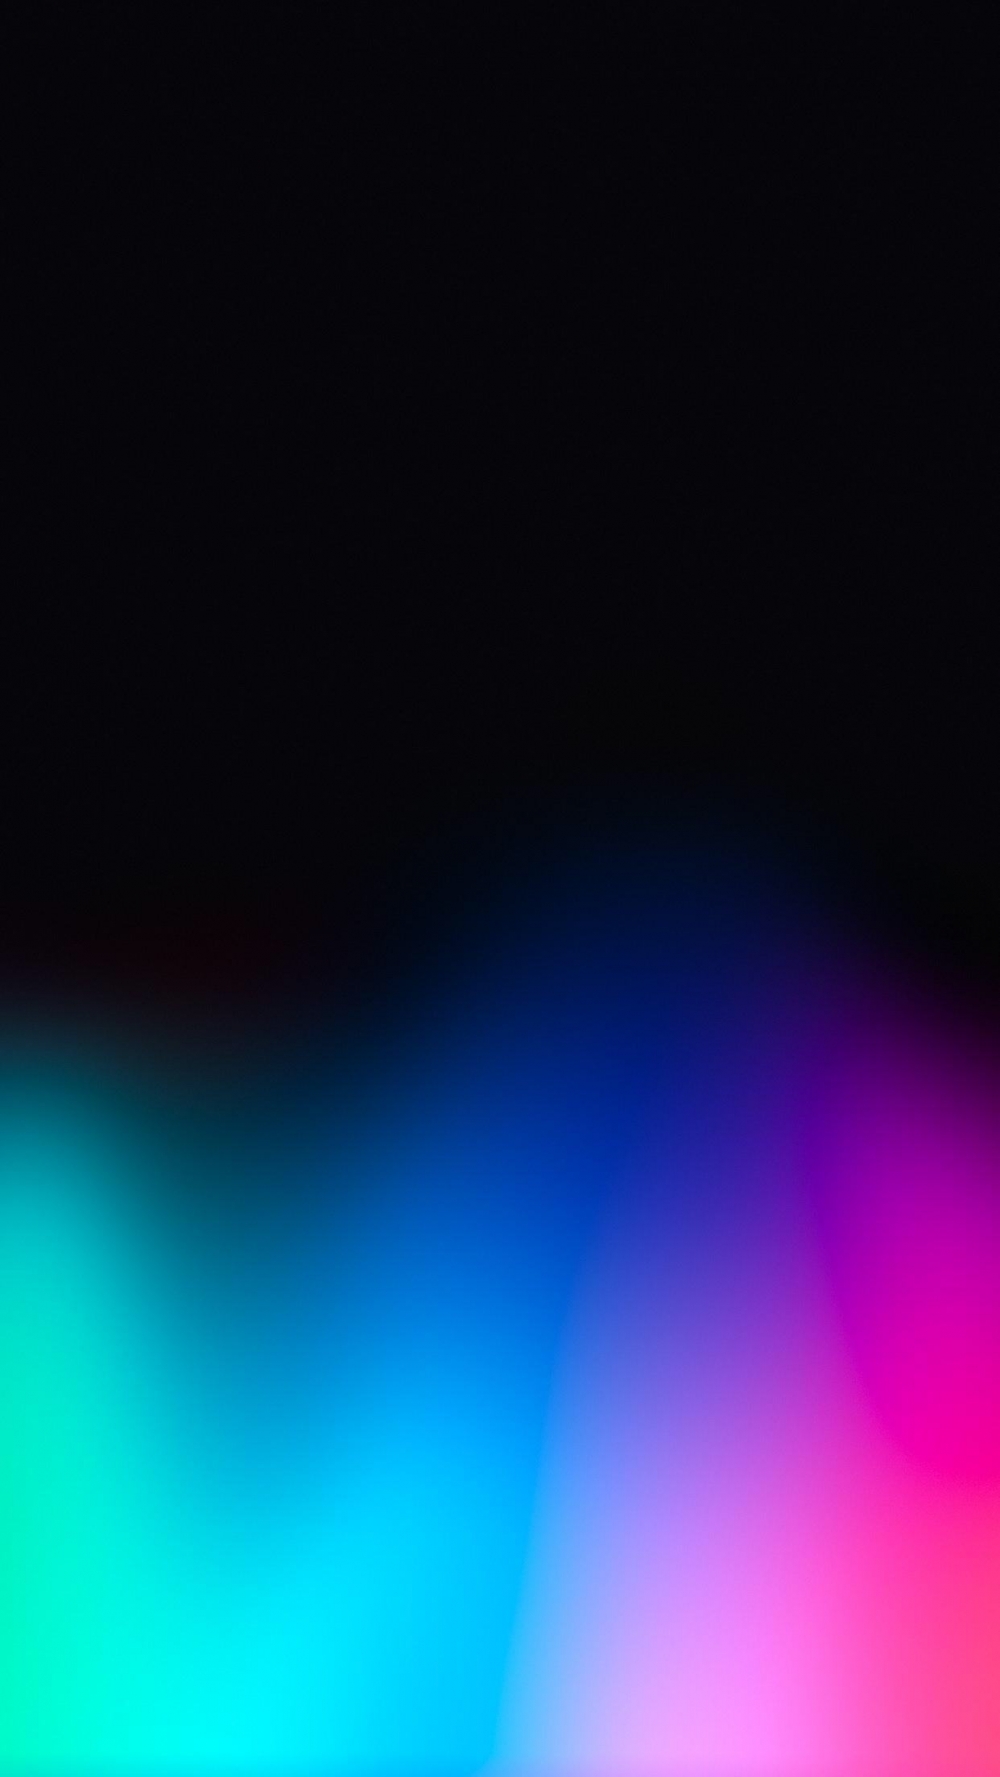 Colorful Bottom Blue Purple Green  wallpaper for Apple iPhone, Mac, iPad and more